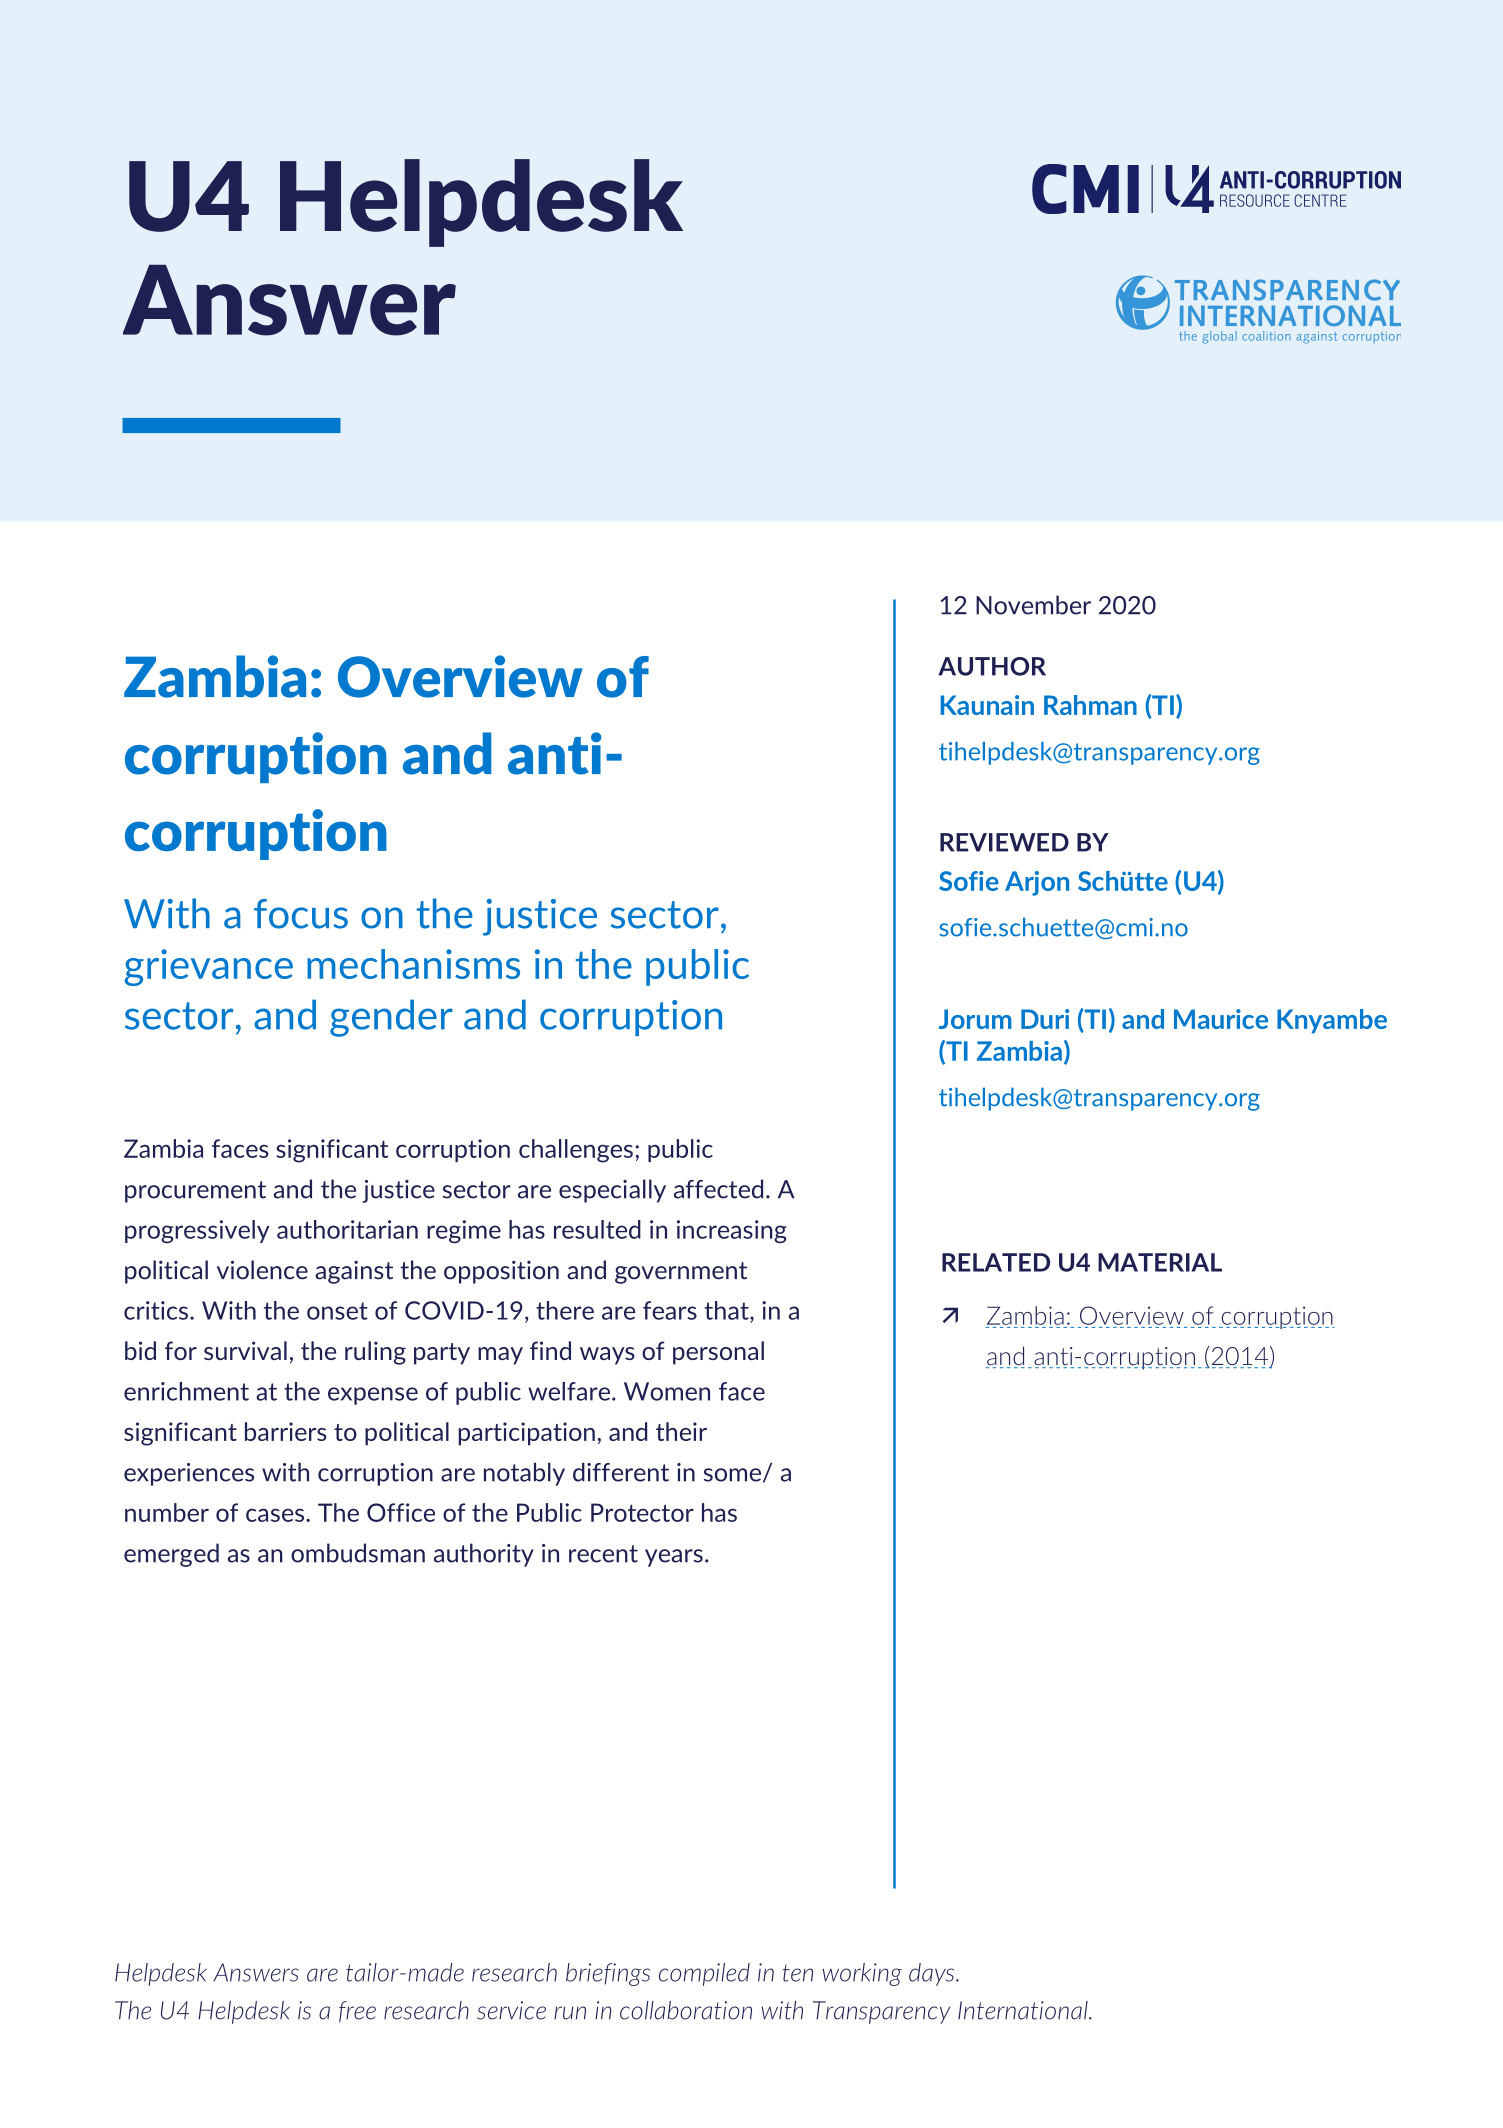 Zambia: Overview of corruption and anti-corruption